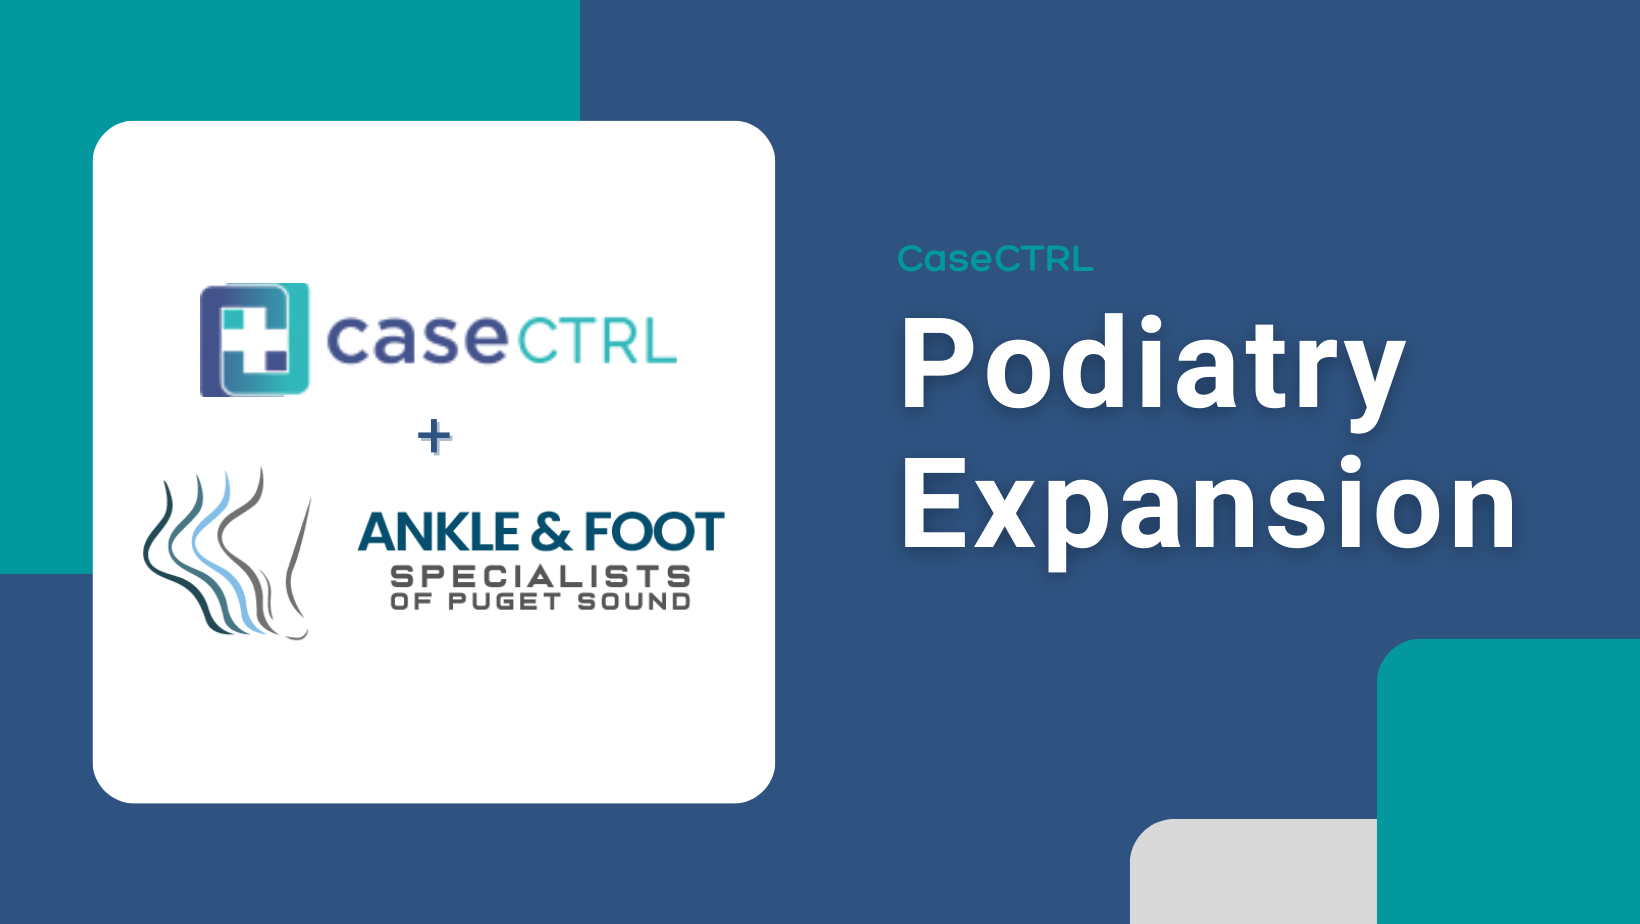 CaseCTRL Surgery Scheduling Platform Expands to Podiatry!